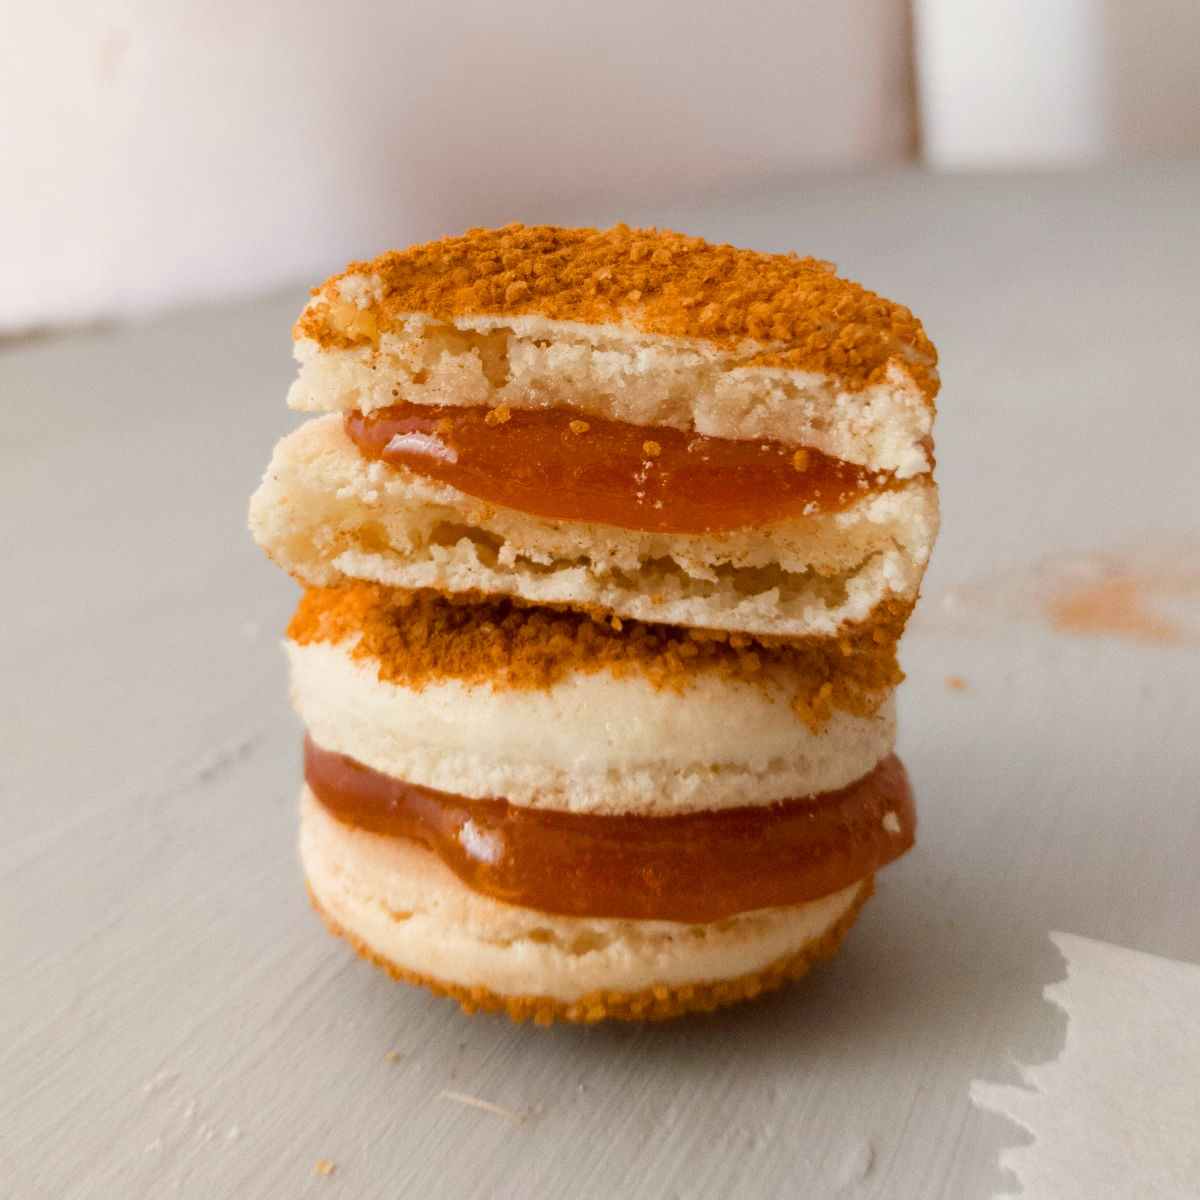 Two churro macarons stacked on top of each other.